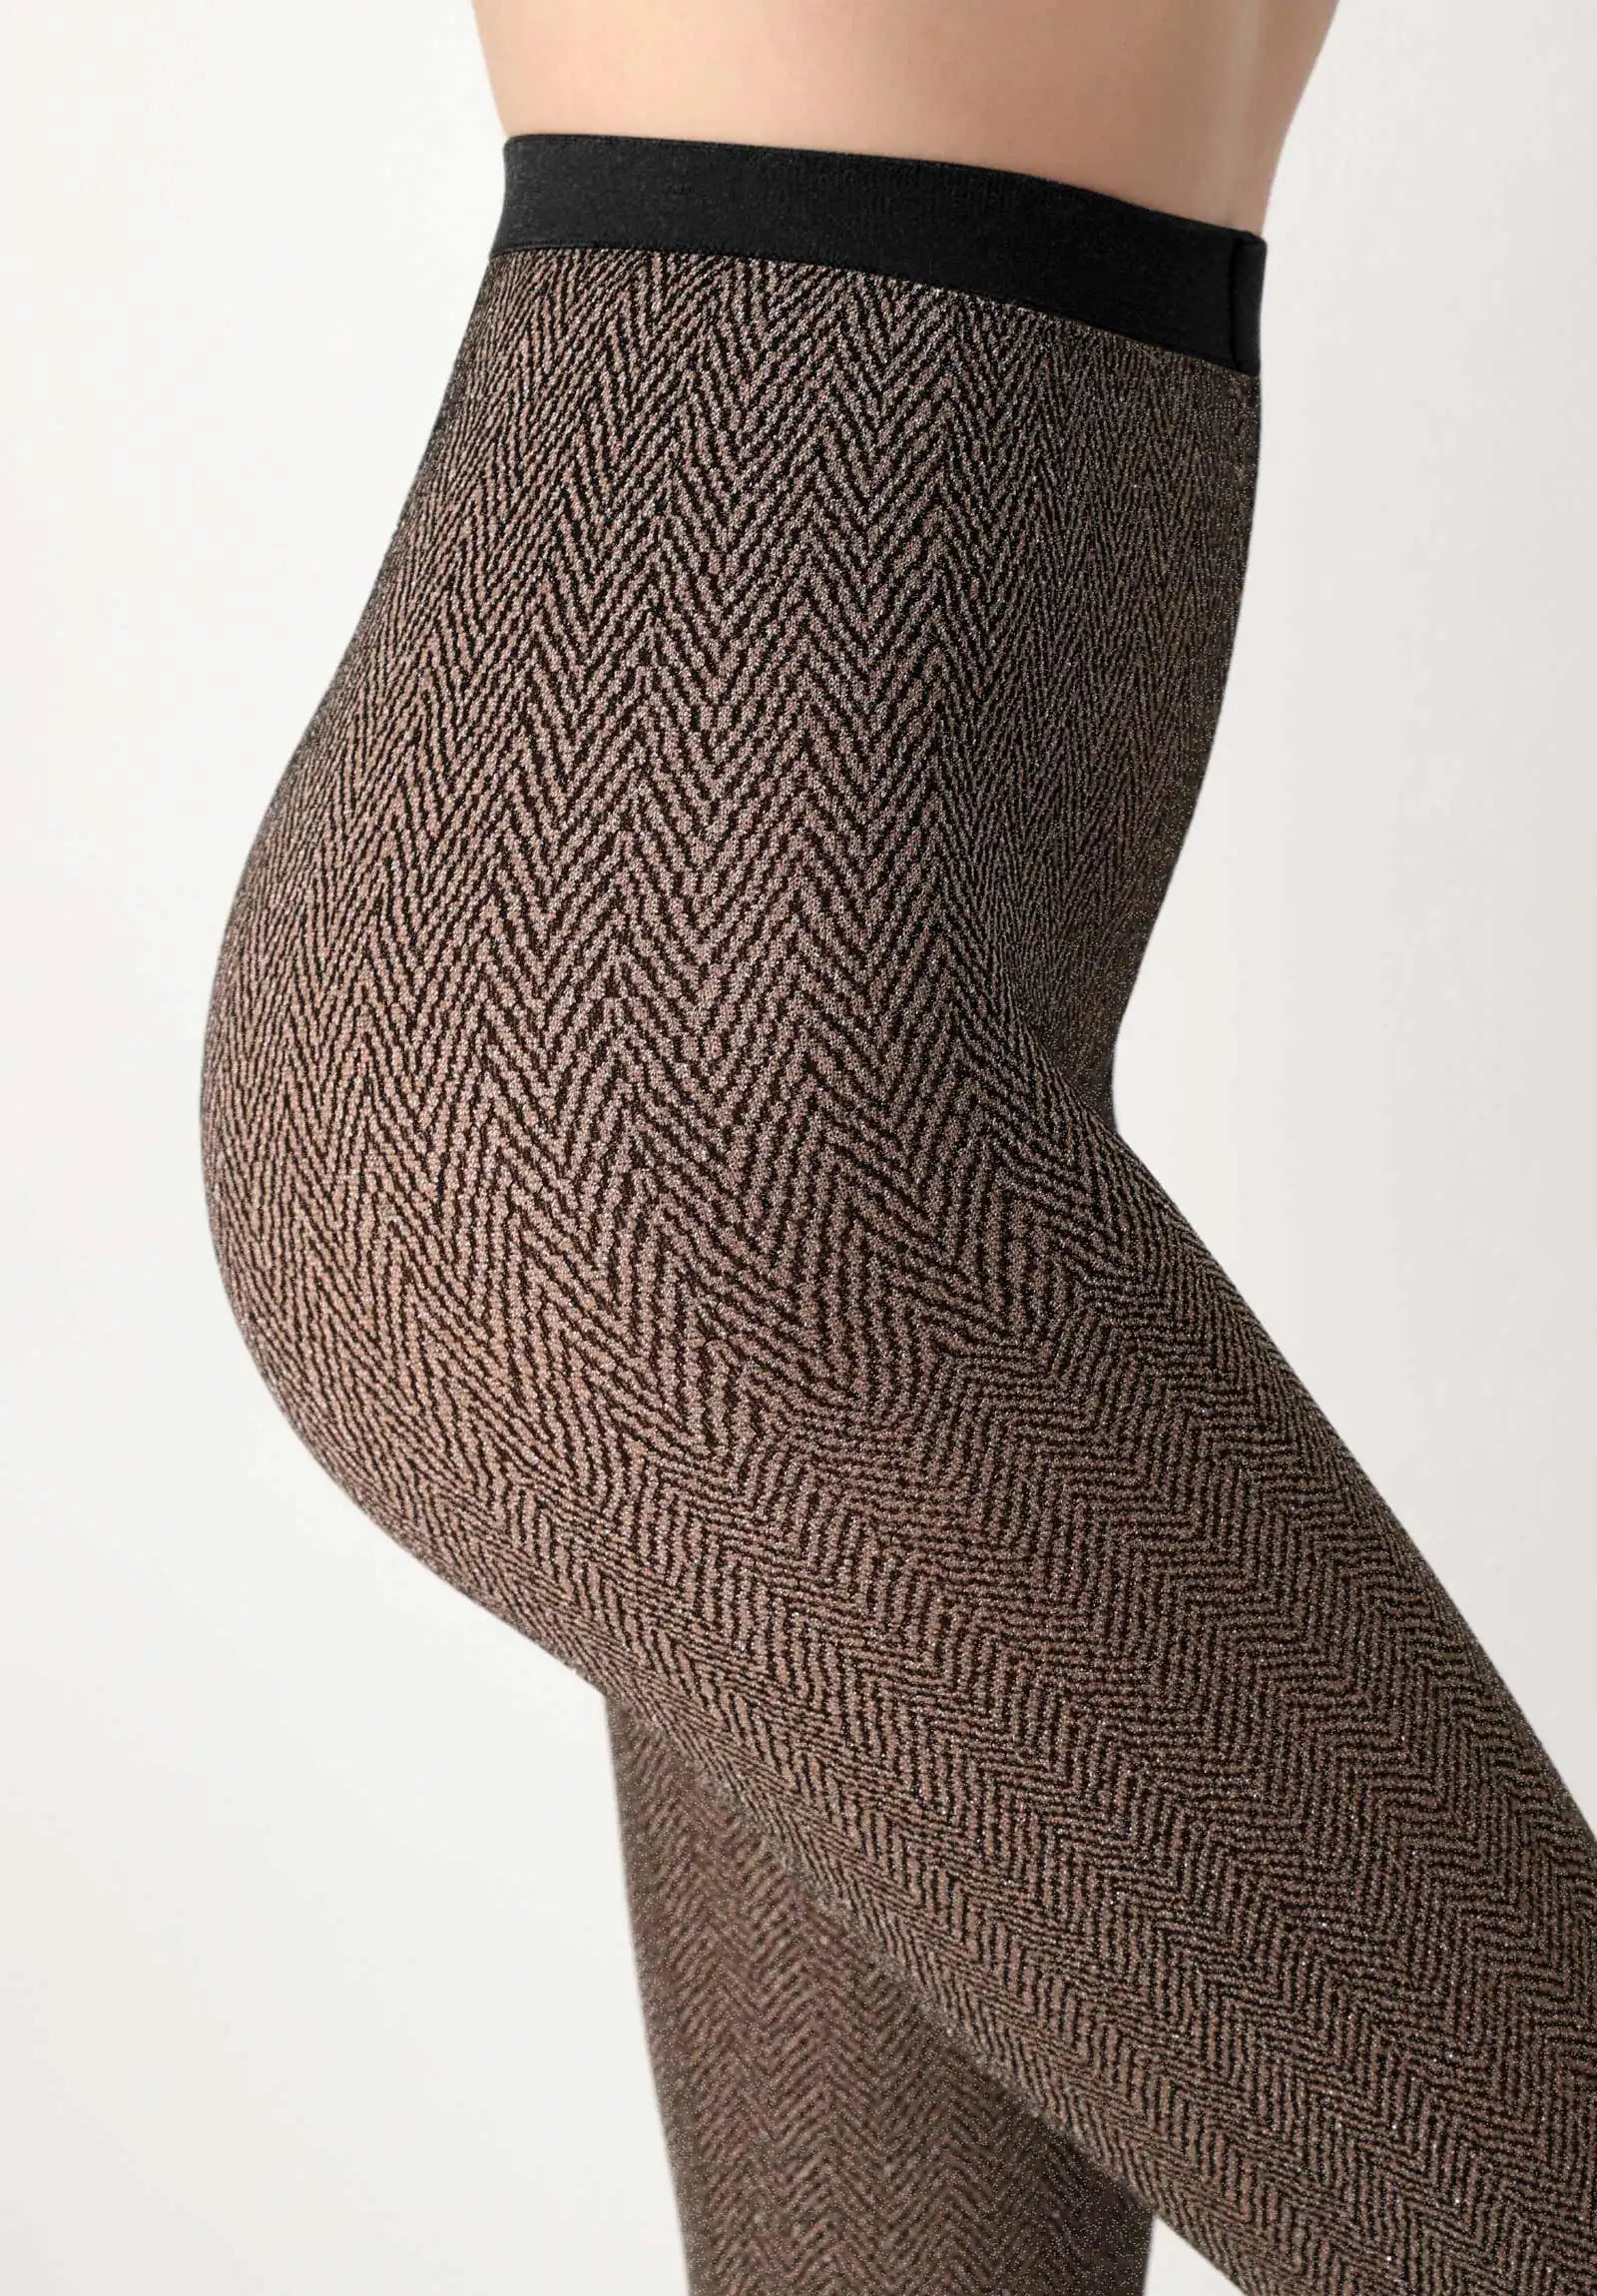 Oroblù Sparkle Tweed Tights - Opaque two-toned tweed herringbone patterned fashion tights in beige and black with sparkly silver glitter